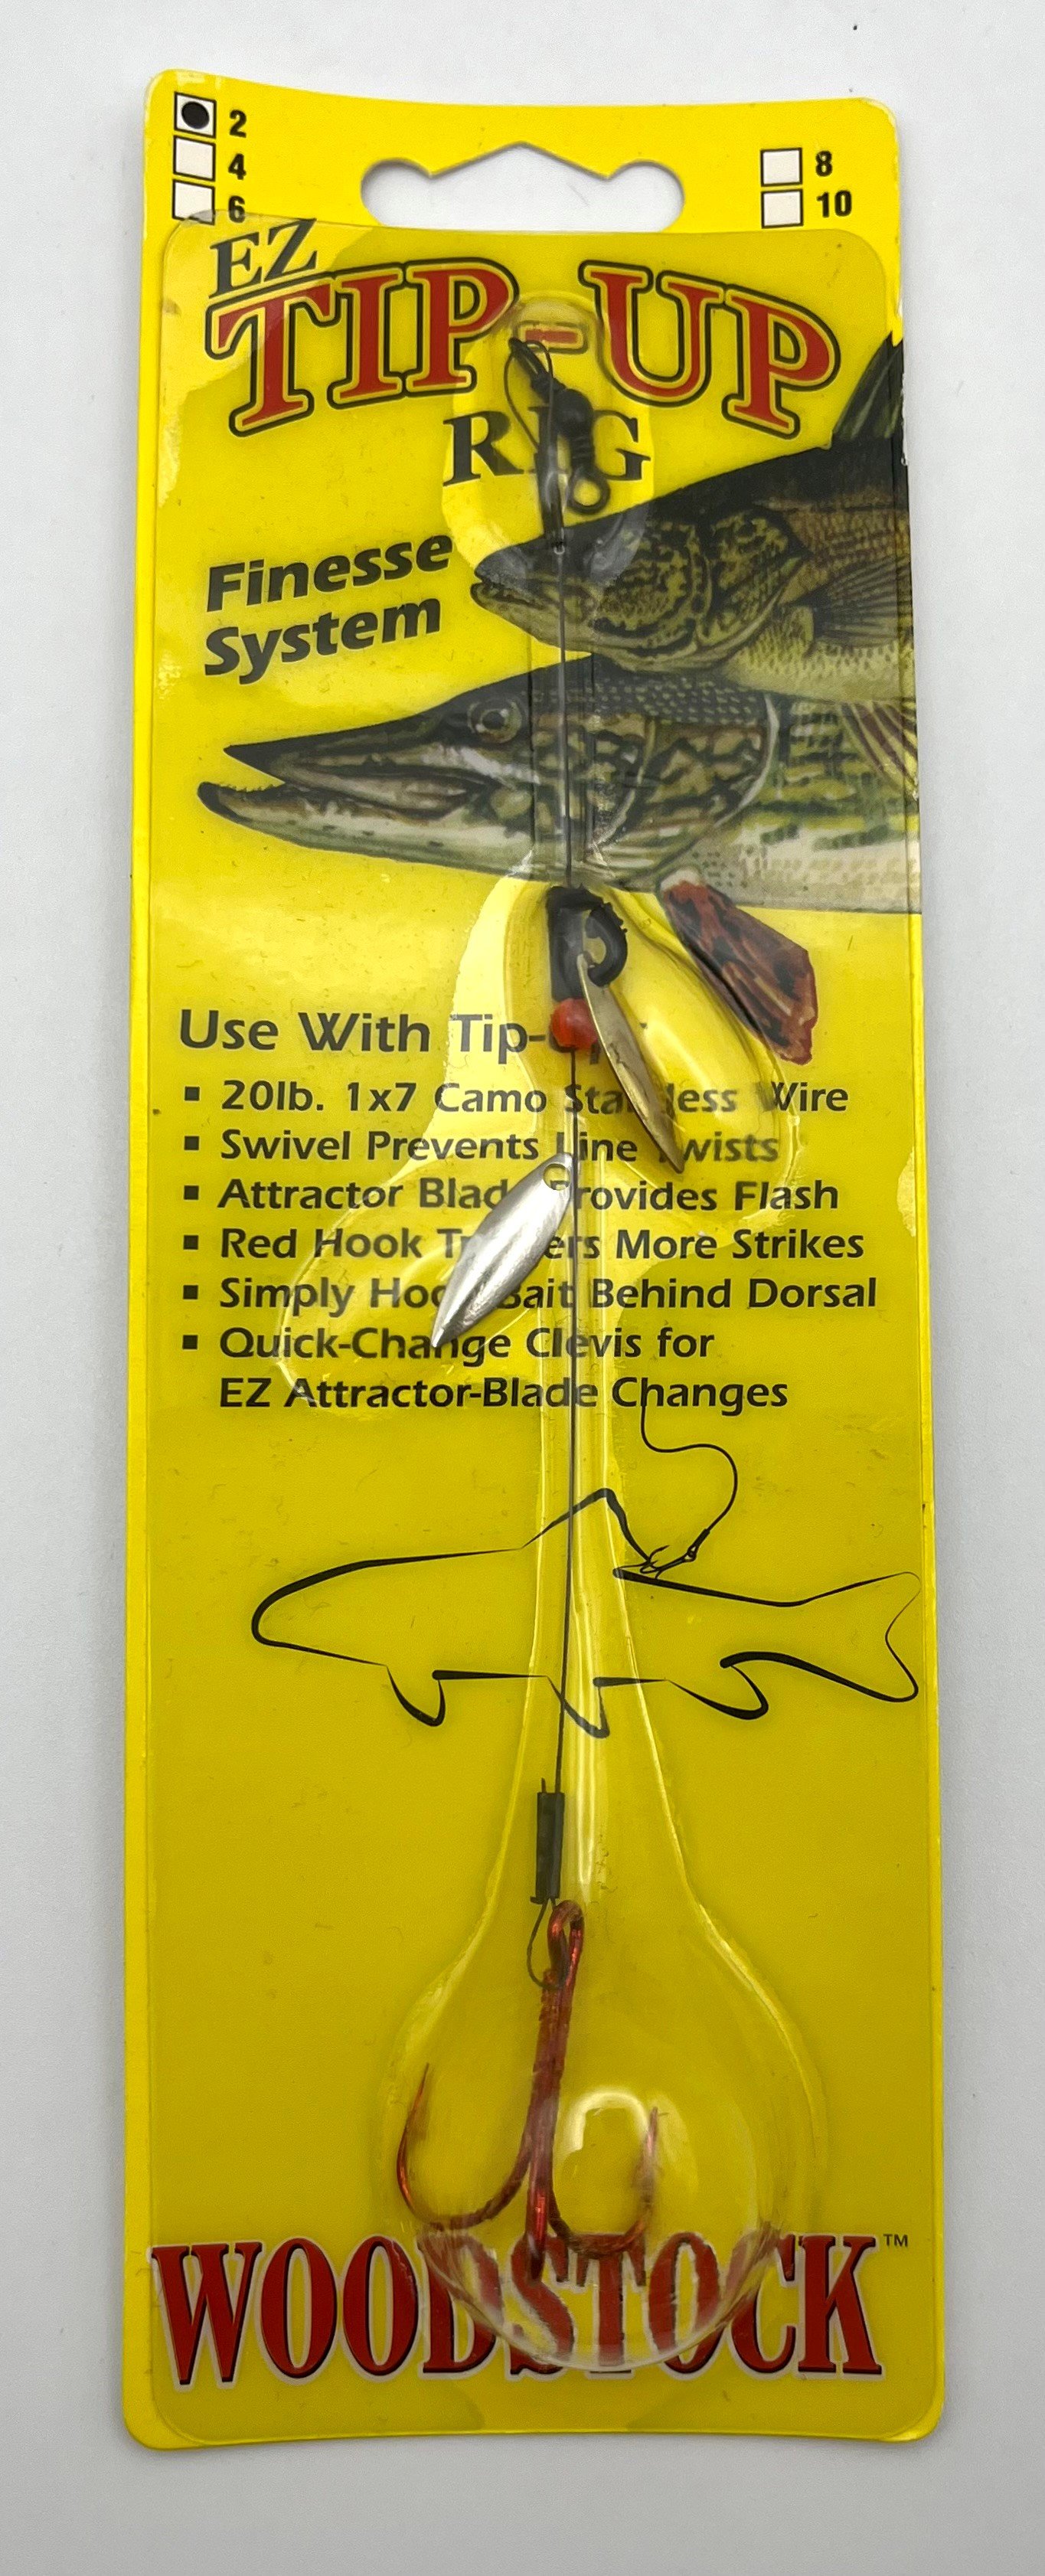 Finesse tip-up fishing